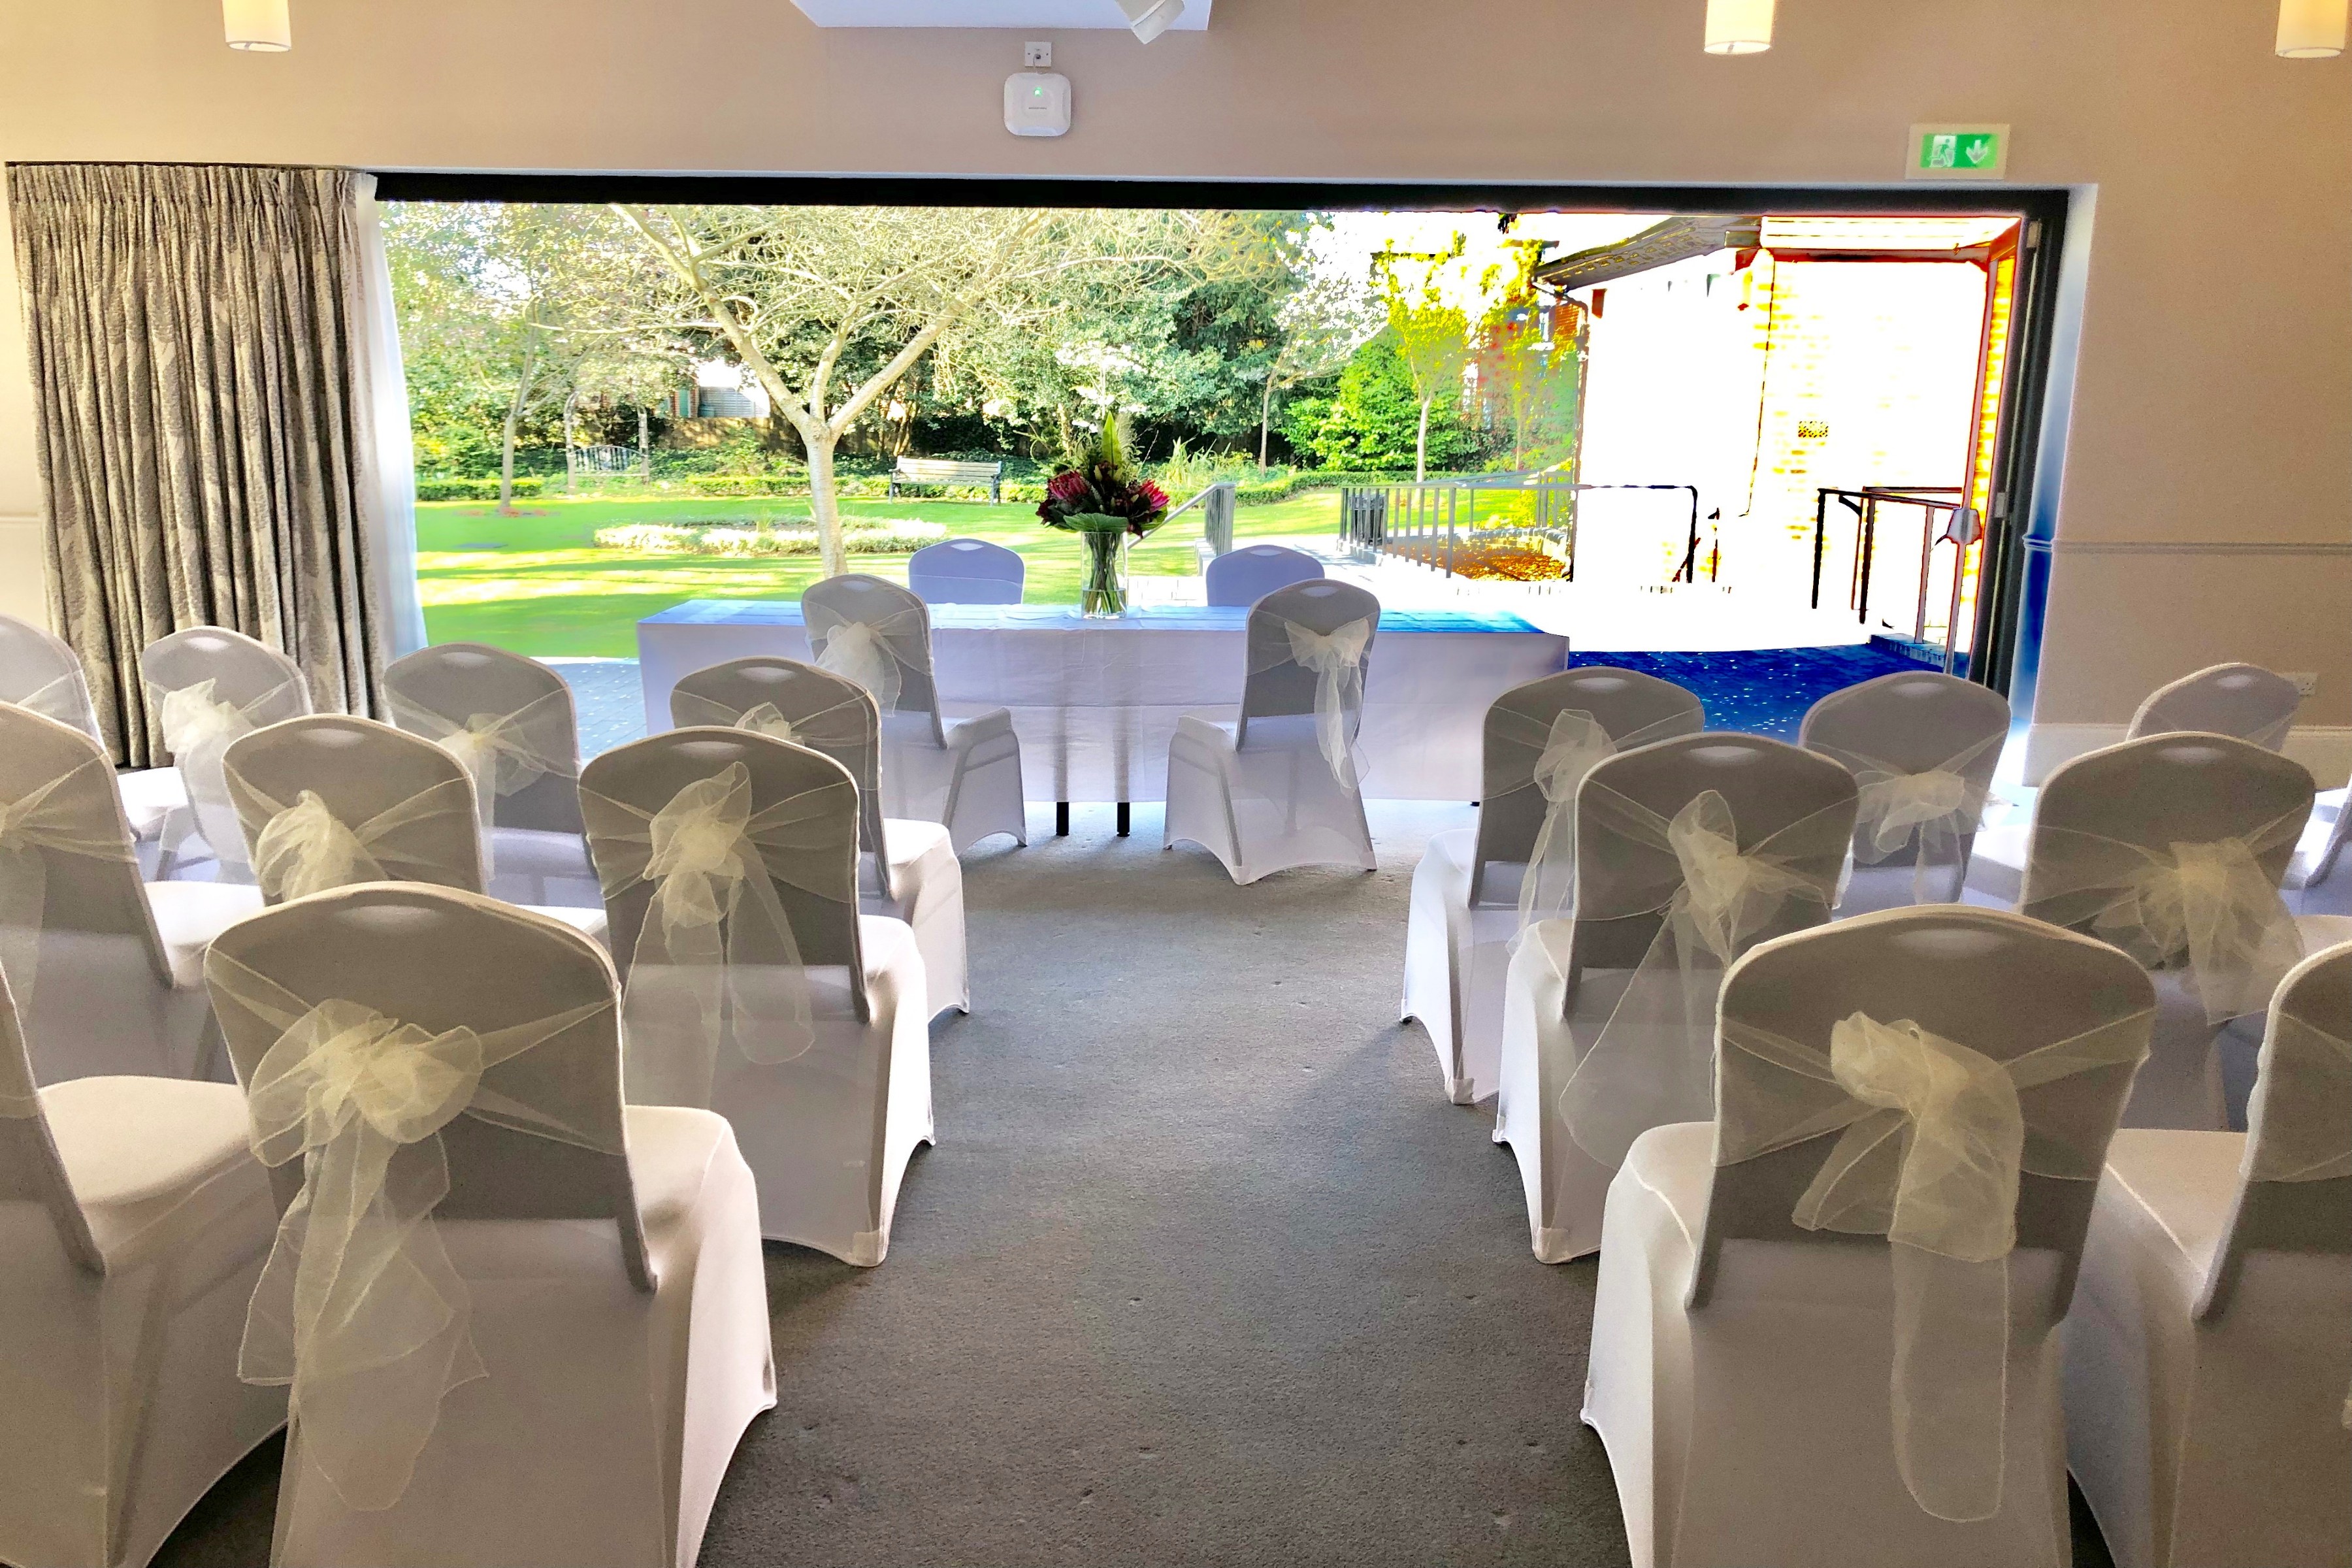 Ceremony room with rows of white chairs